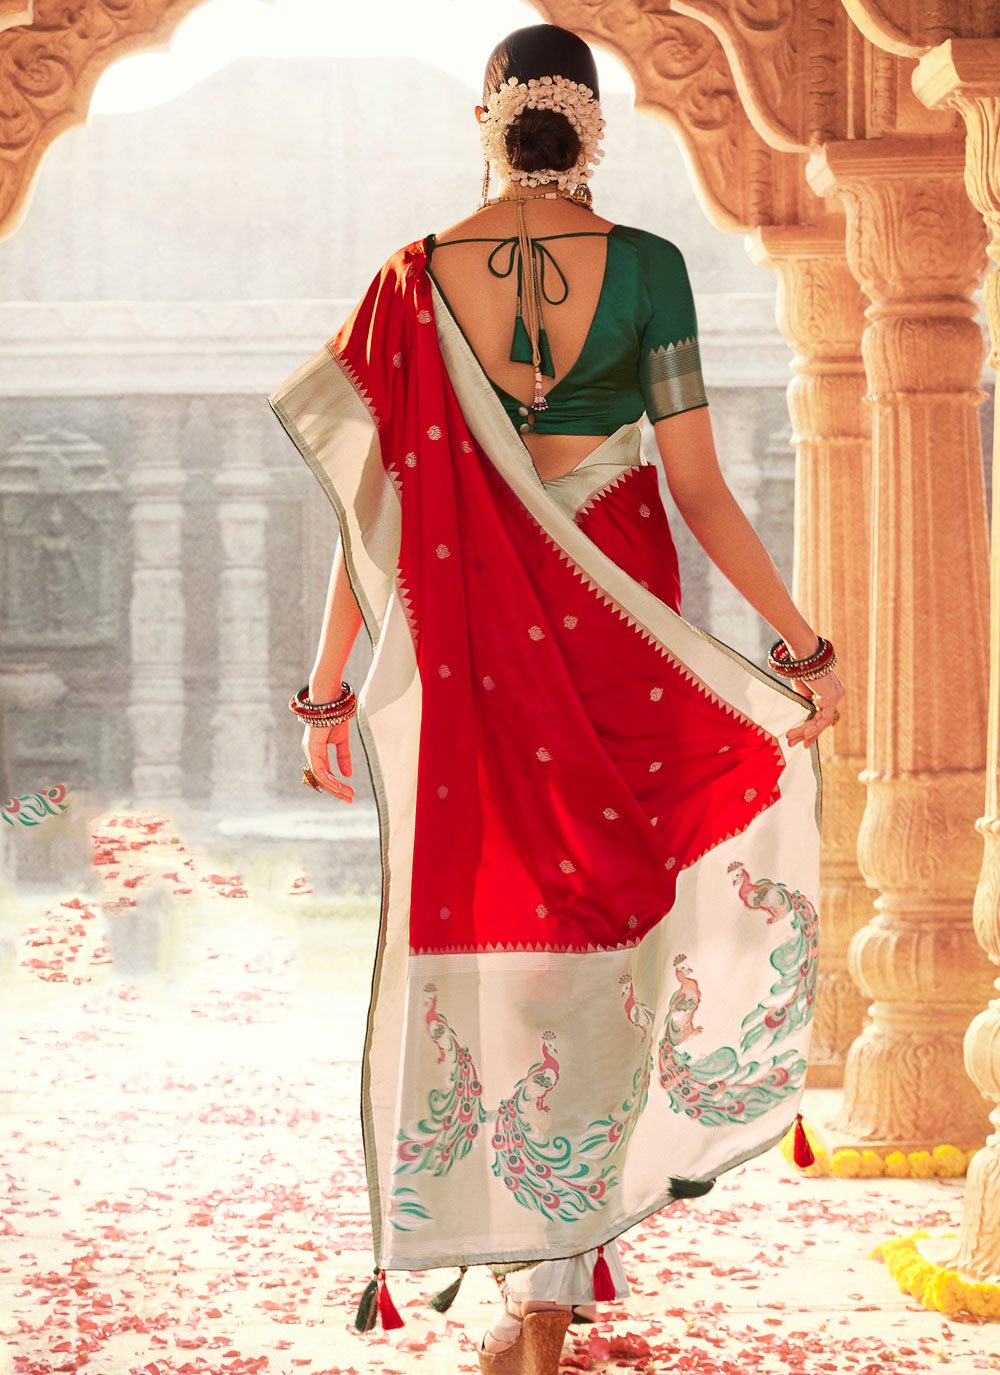 Woven Work Traditional Designer Saree For Festival